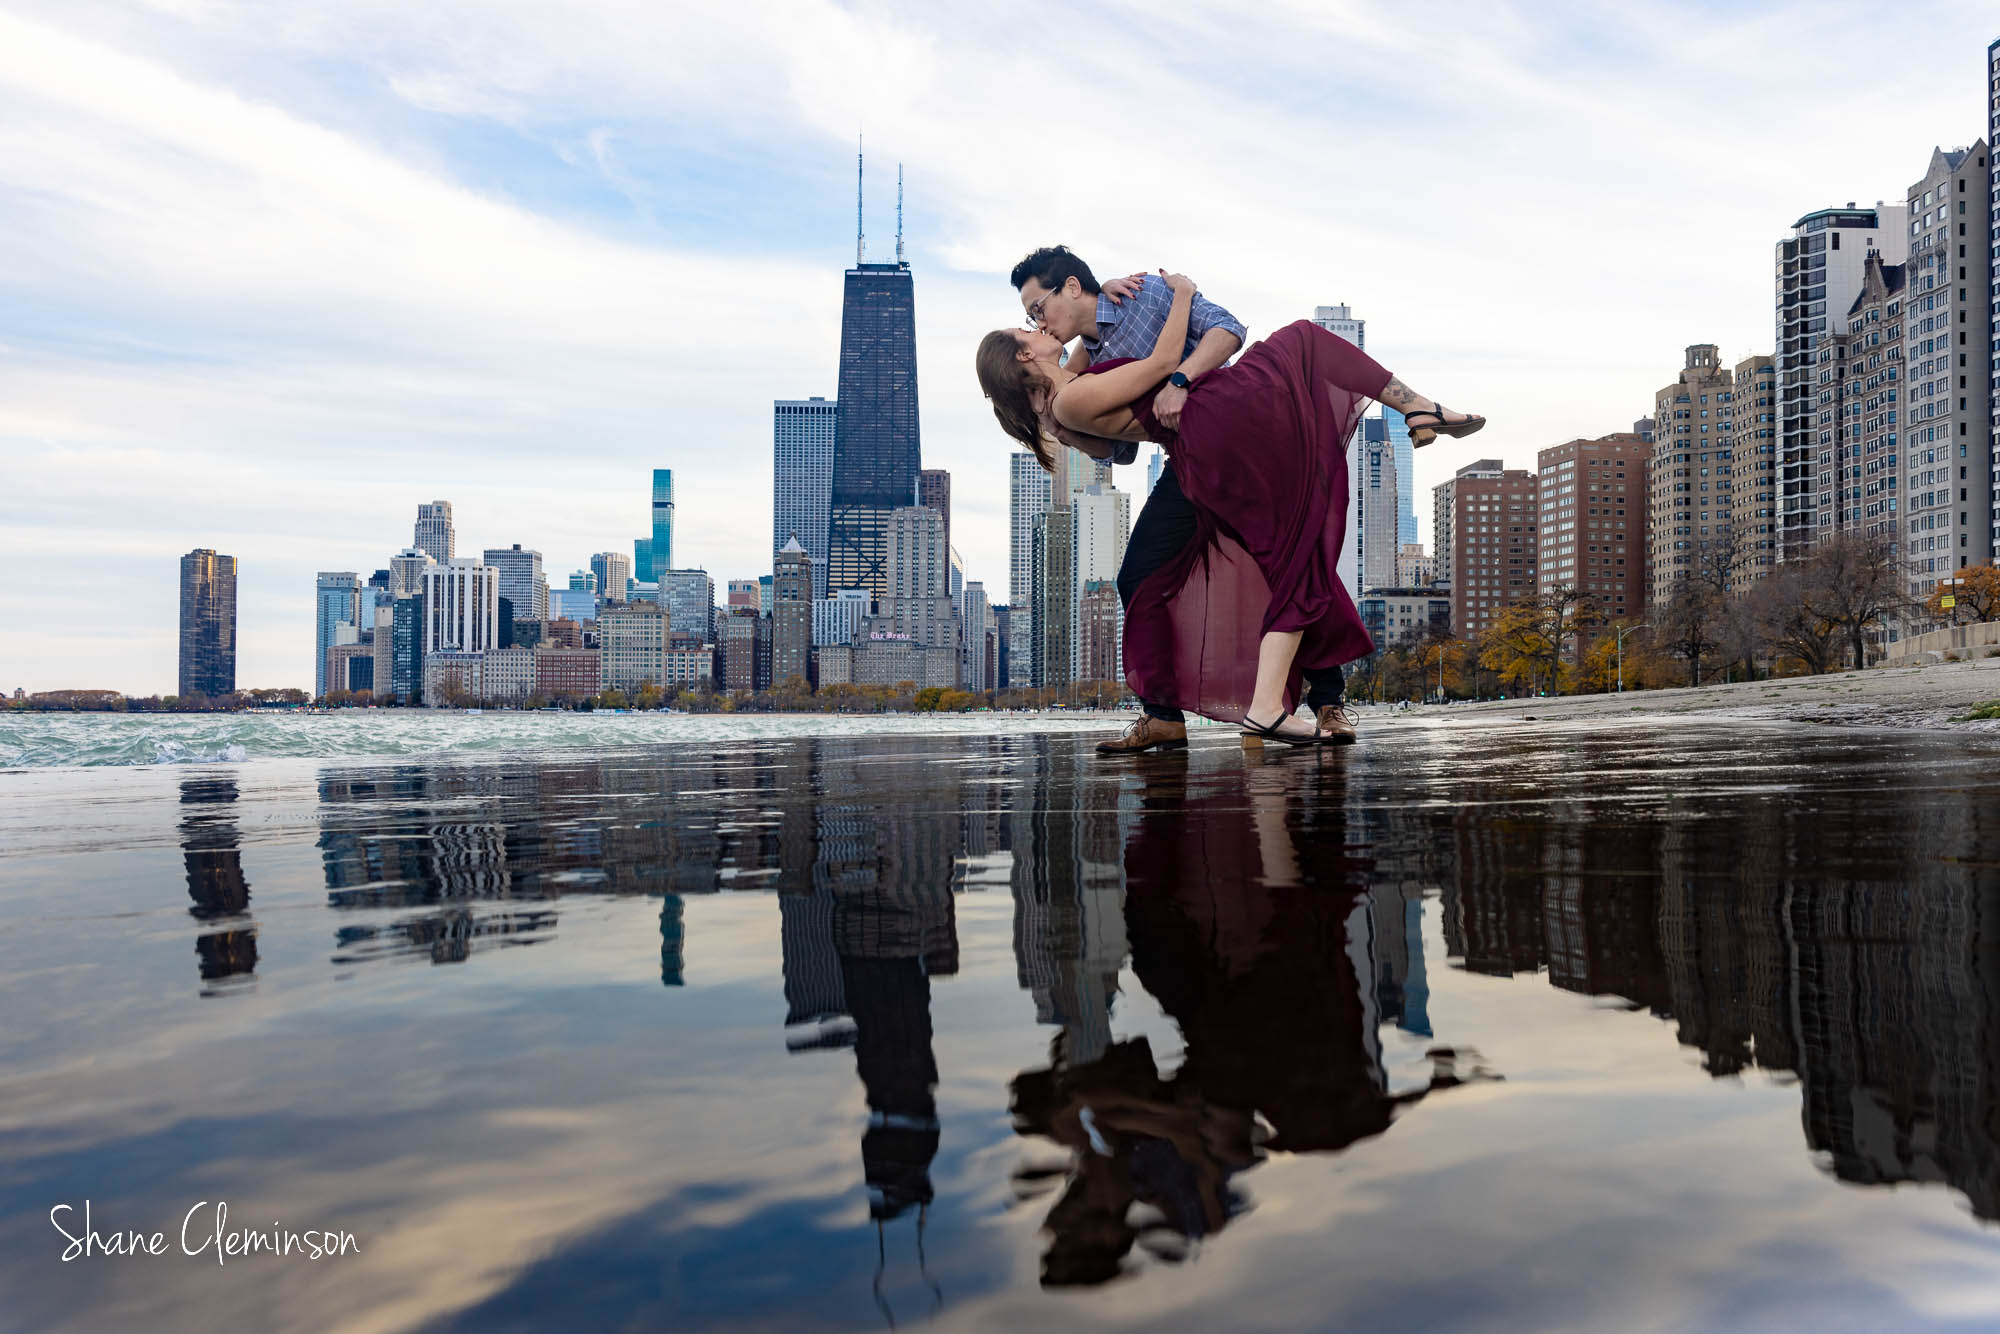 Awesome Chicago Engagement Photo Locations. North Avenue Beach Chicago photo Shane Cleminson